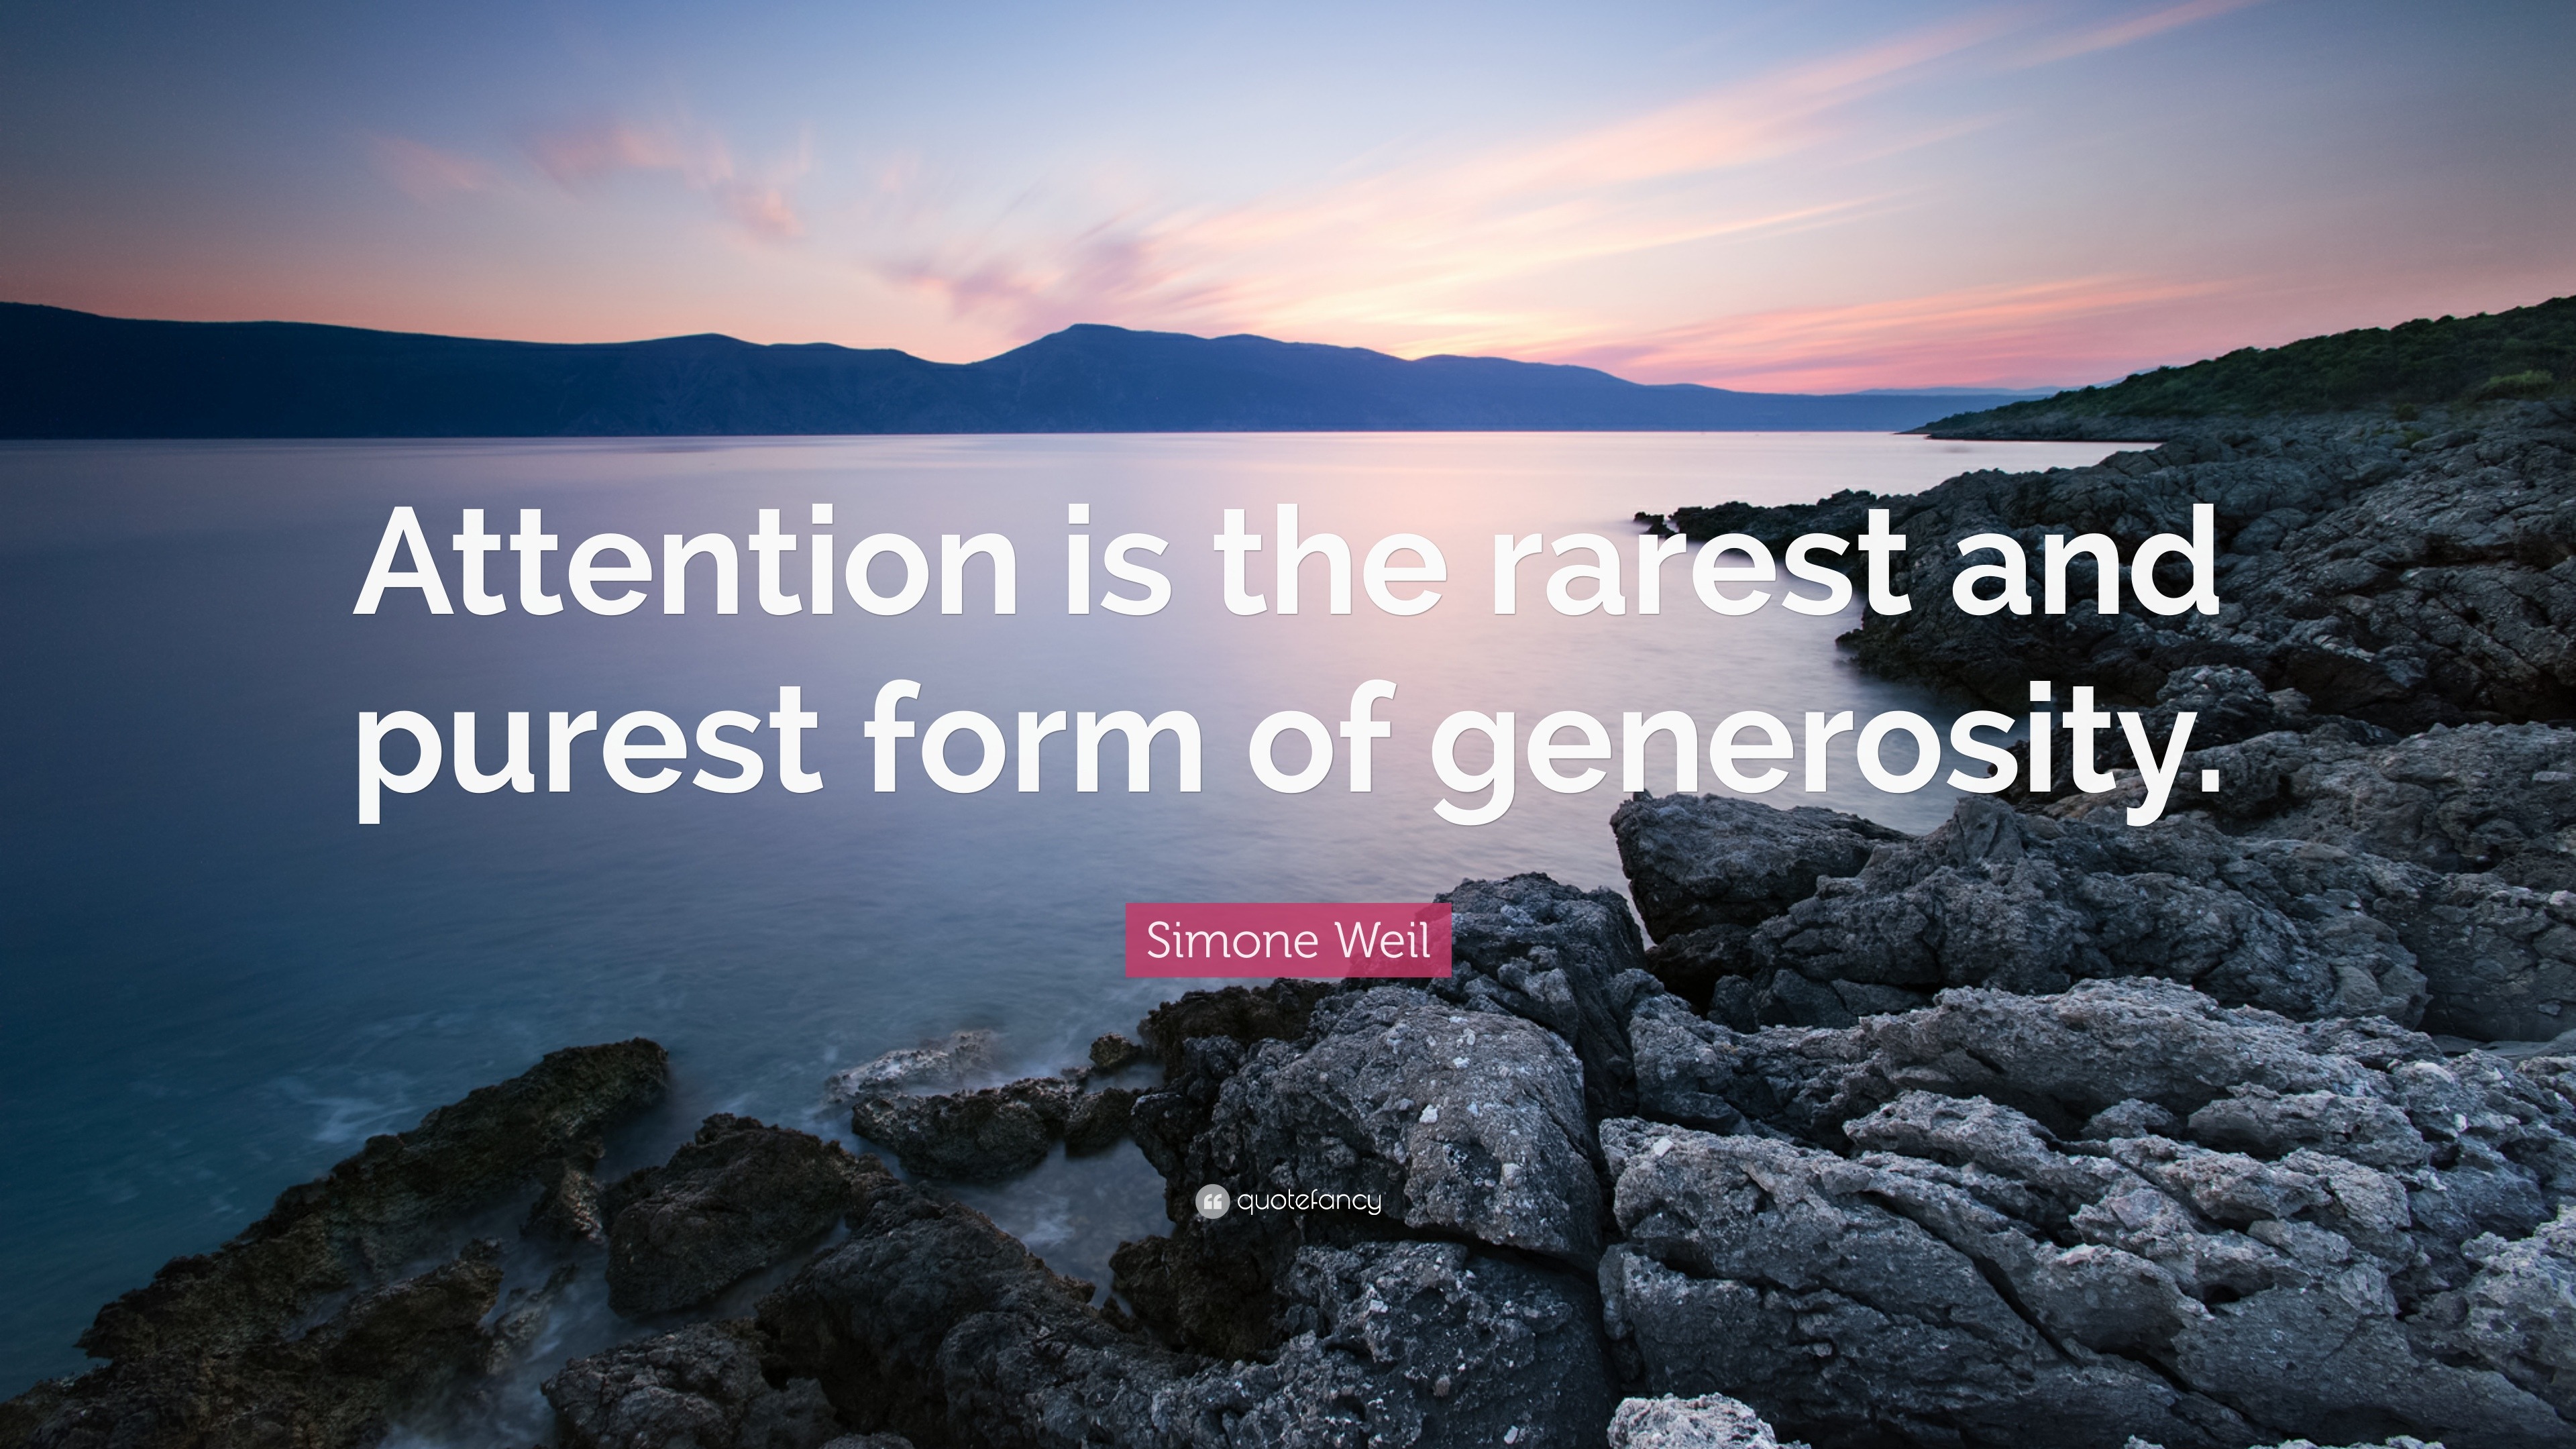 Simone Weil quote: Expectant waiting is the foundation of the spiritual  life.